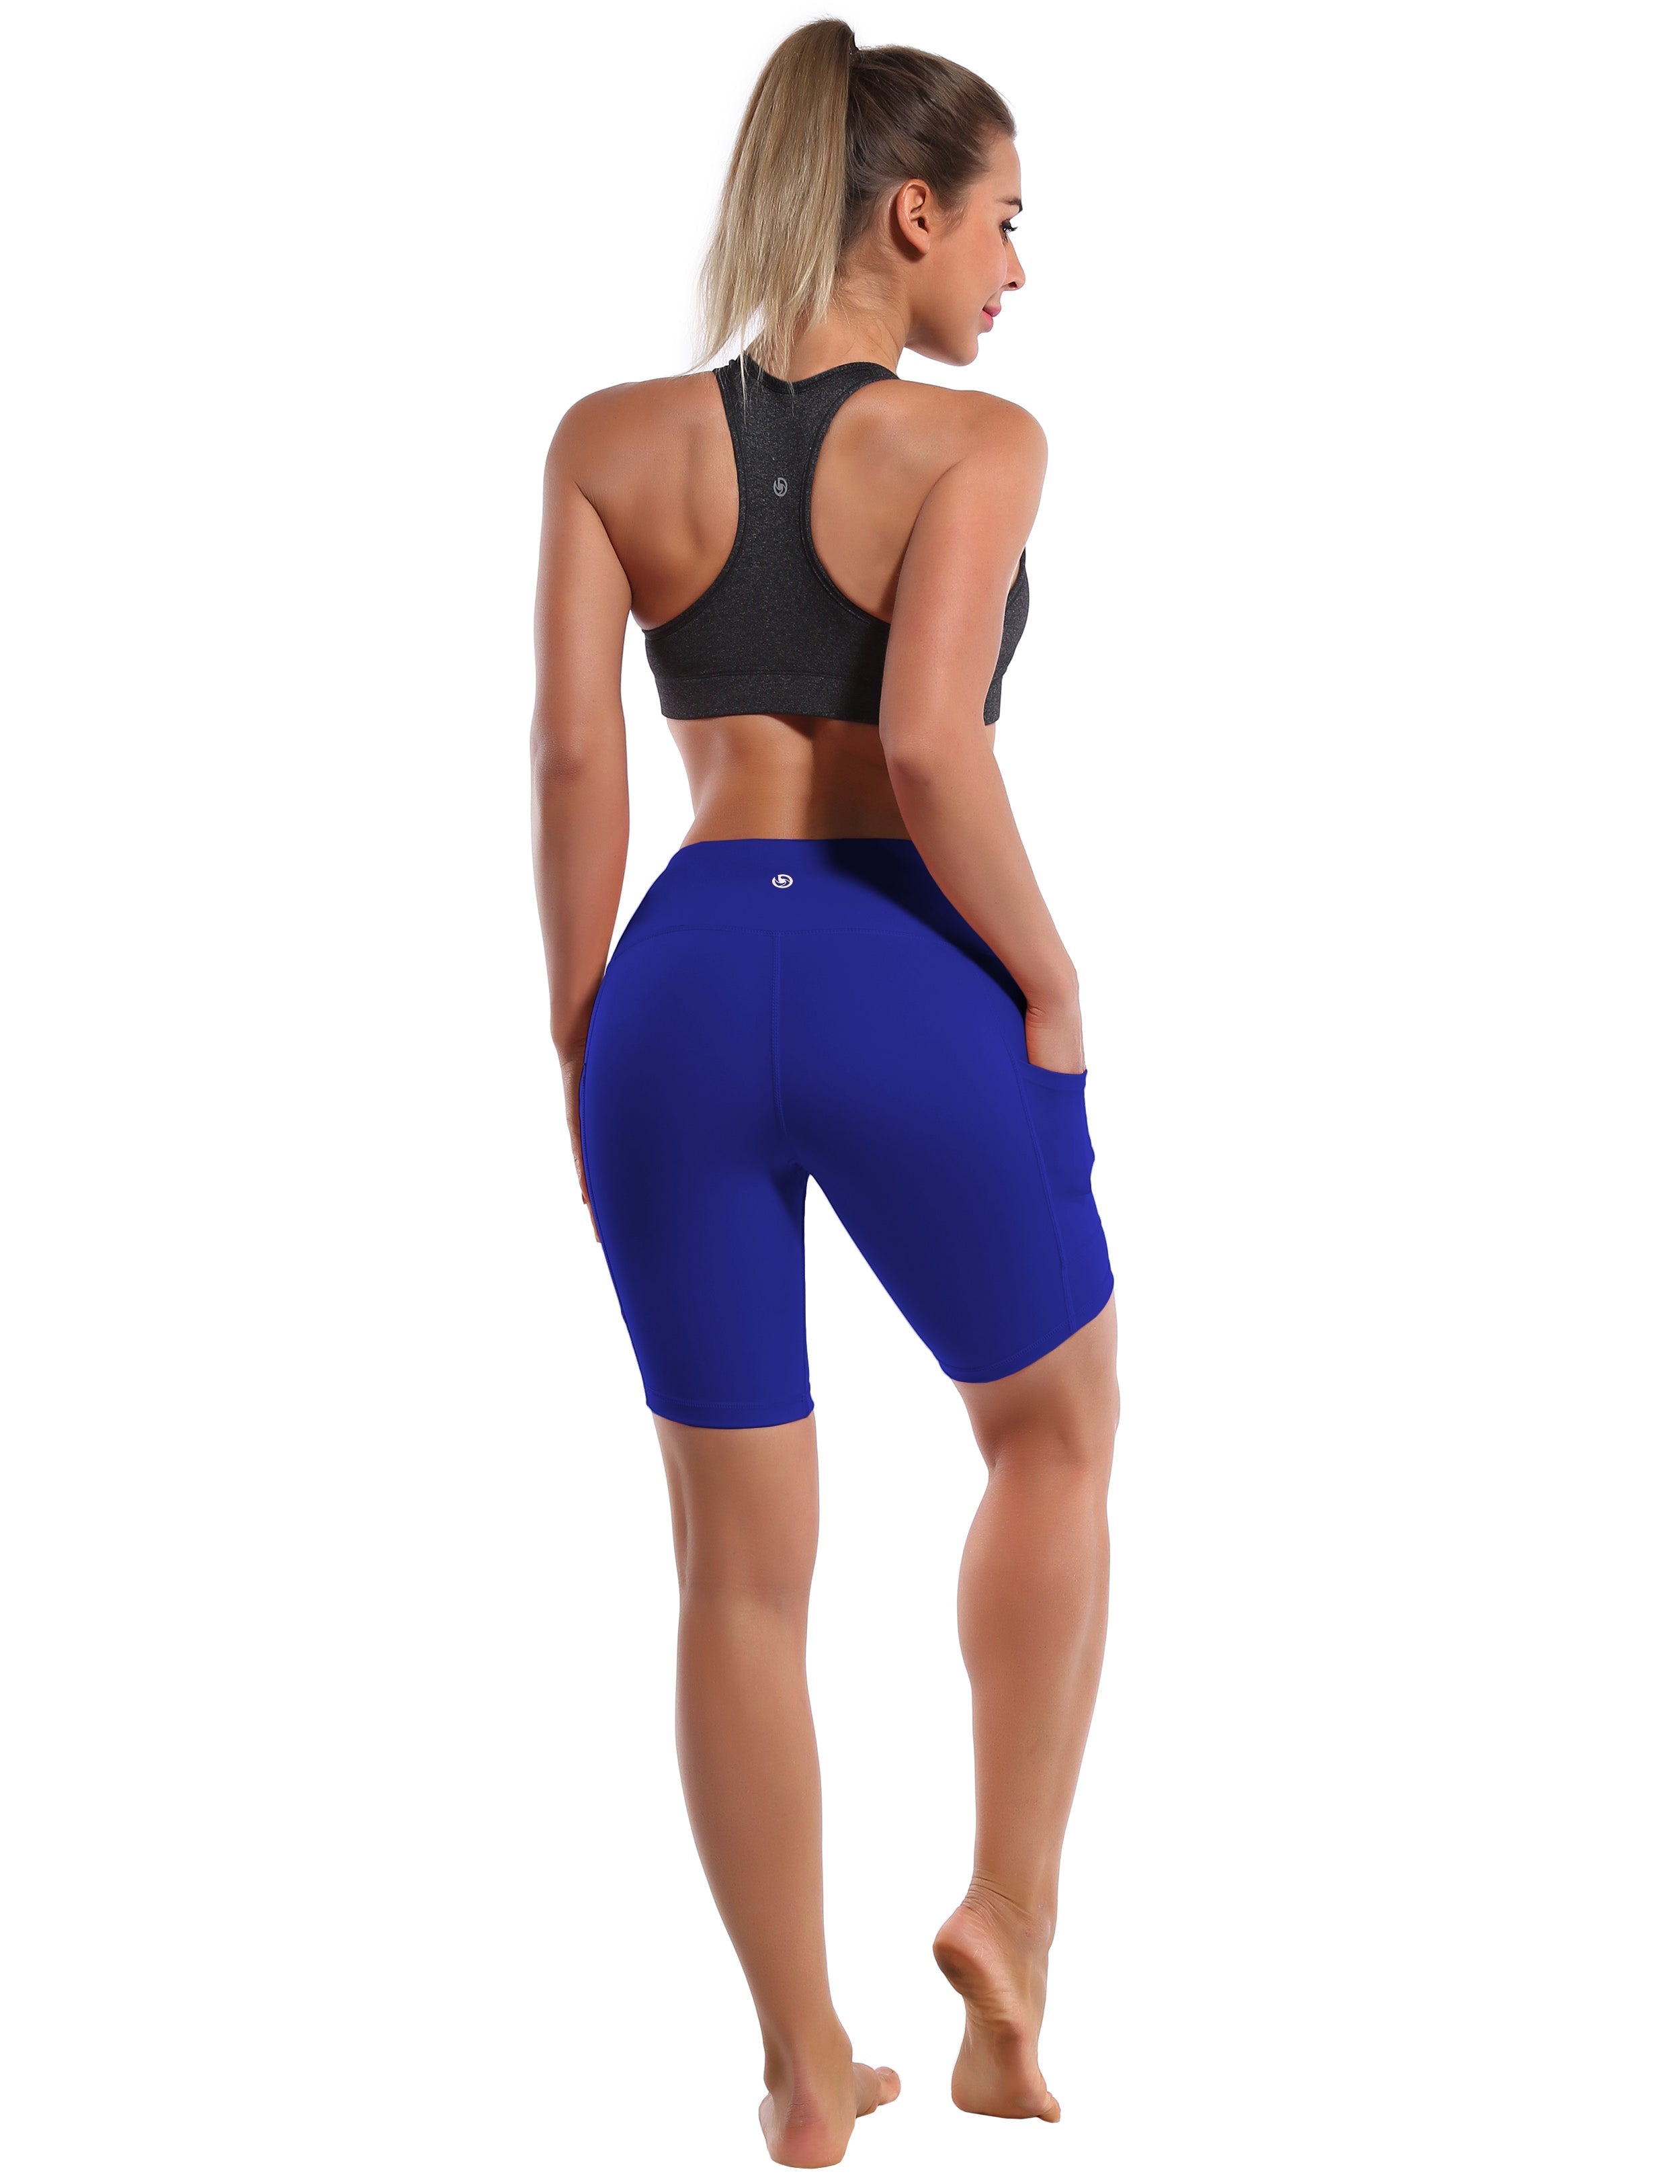 8" Side Pockets Gym Shorts navy Sleek, soft, smooth and totally comfortable: our newest style is here. Softest-ever fabric High elasticity High density 4-way stretch Fabric doesn't attract lint easily No see-through Moisture-wicking Machine wash 75% Nylon, 25% Spandex